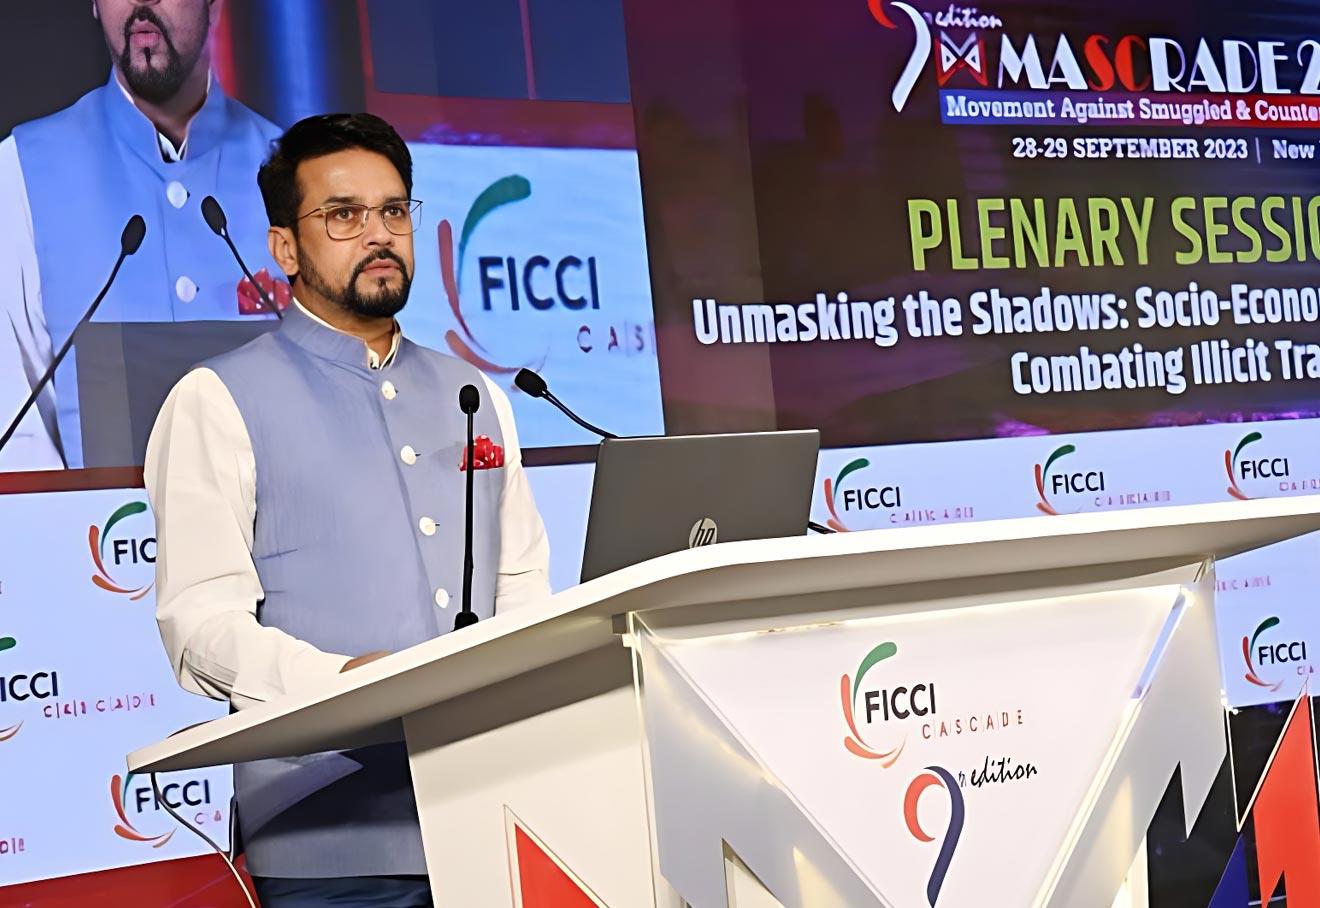 Union Minister Anurag Thakur Warns Of Illicit Trade Threat As Barrier To India's Goal Of $5 Trillion Economy